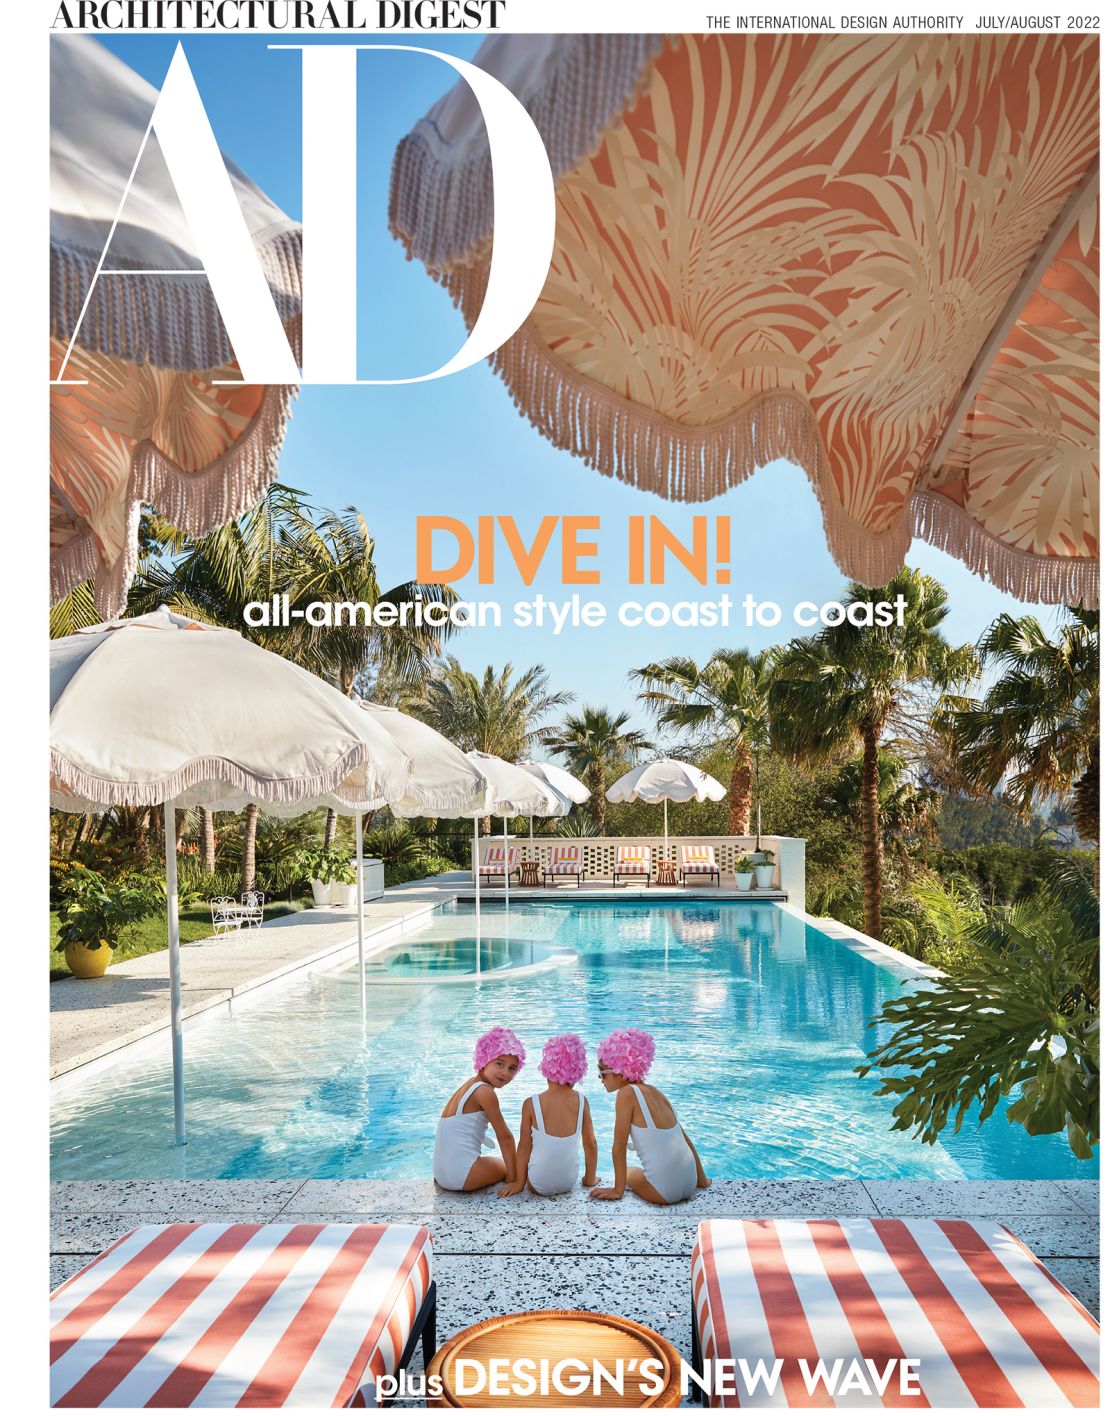 Mary Kitchen's three daughters photographed sitting by the pool on the front cover of Architectural Digest's July/ August issue.